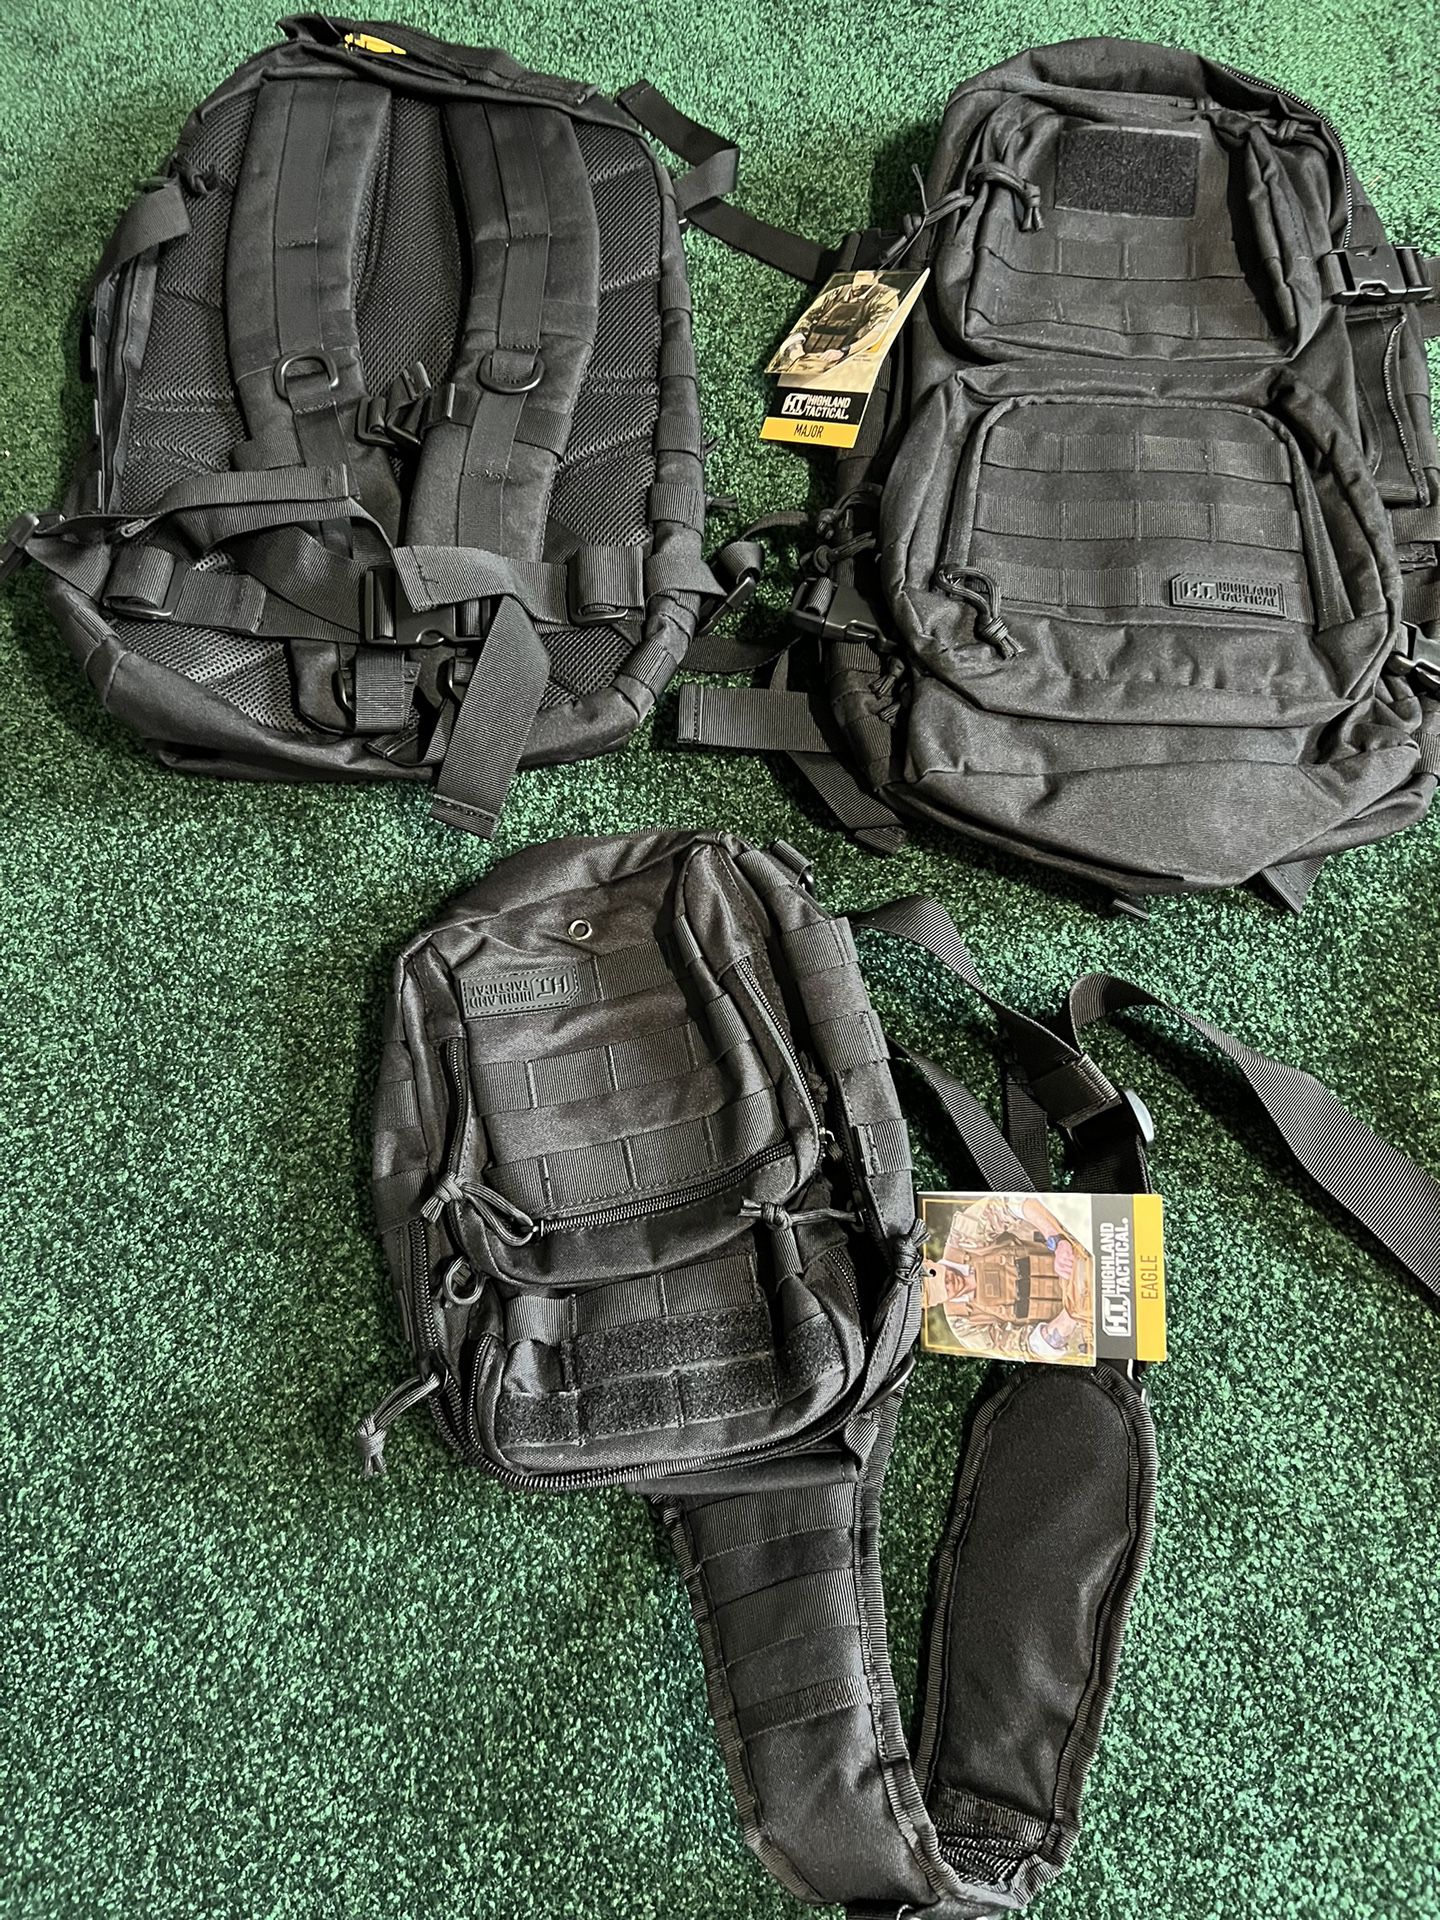 Backpack blowout, $39, will go fast